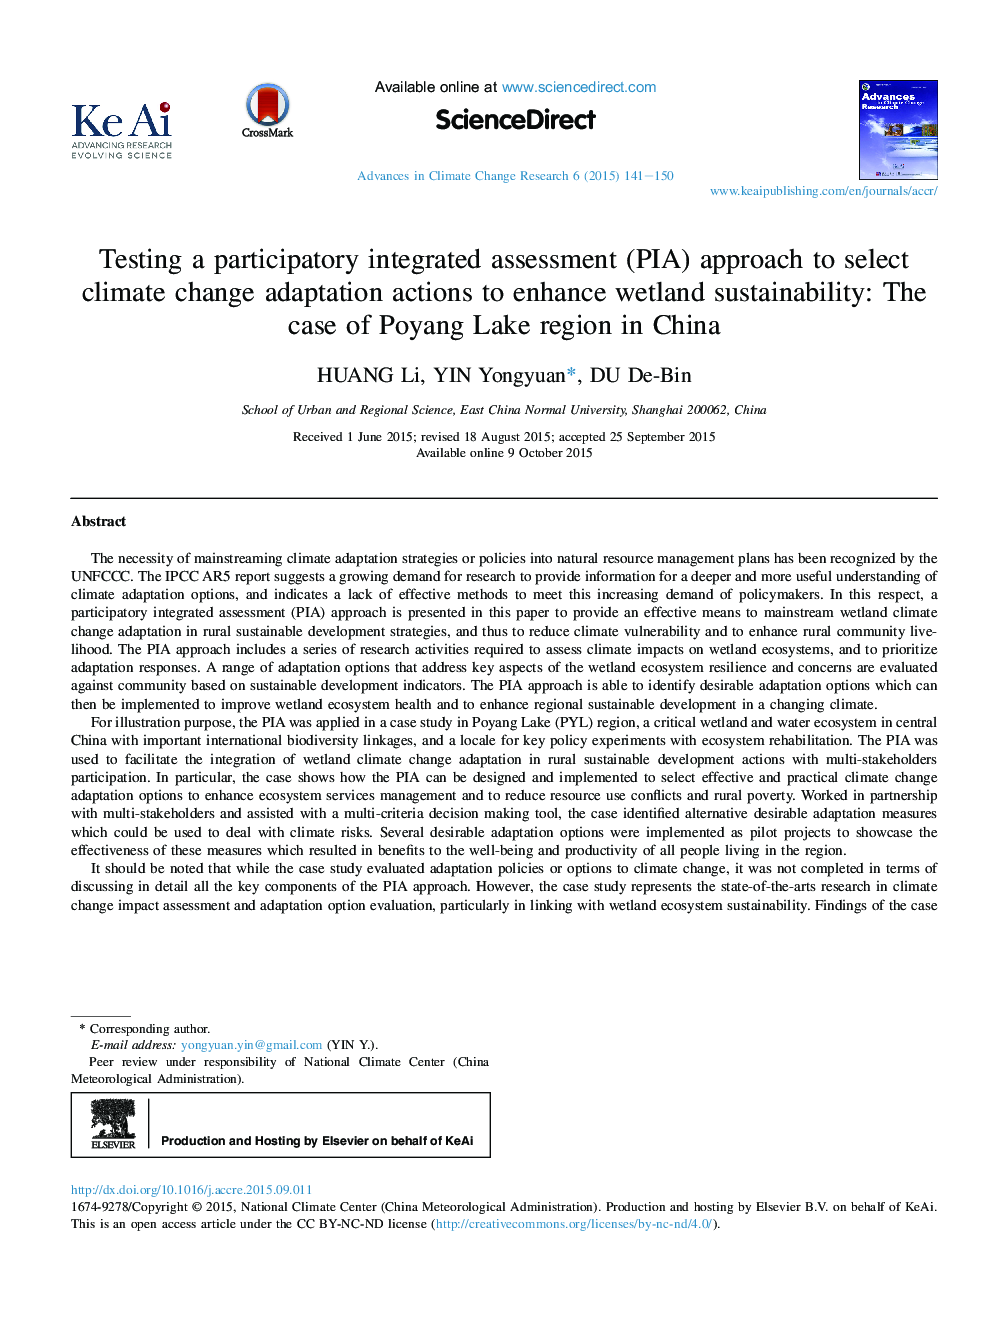 Testing a participatory integrated assessment (PIA) approach to select climate change adaptation actions to enhance wetland sustainability: The case of Poyang Lake region in China 